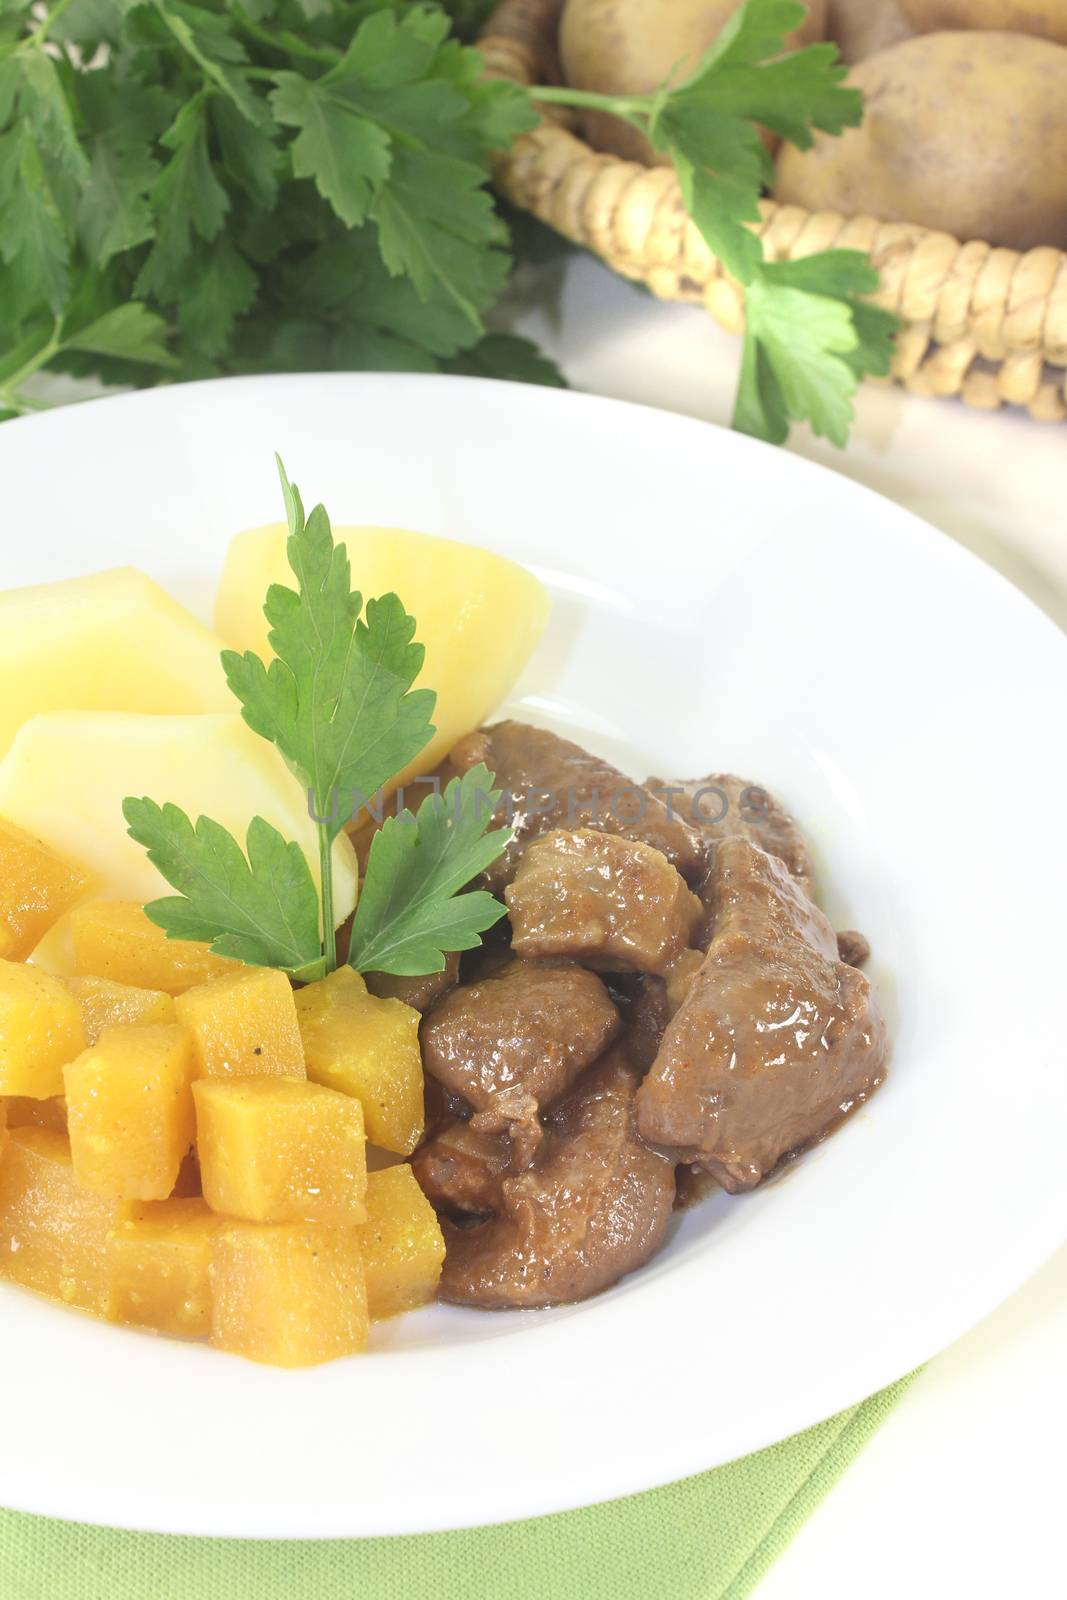 Venison goulash with parsley by discovery